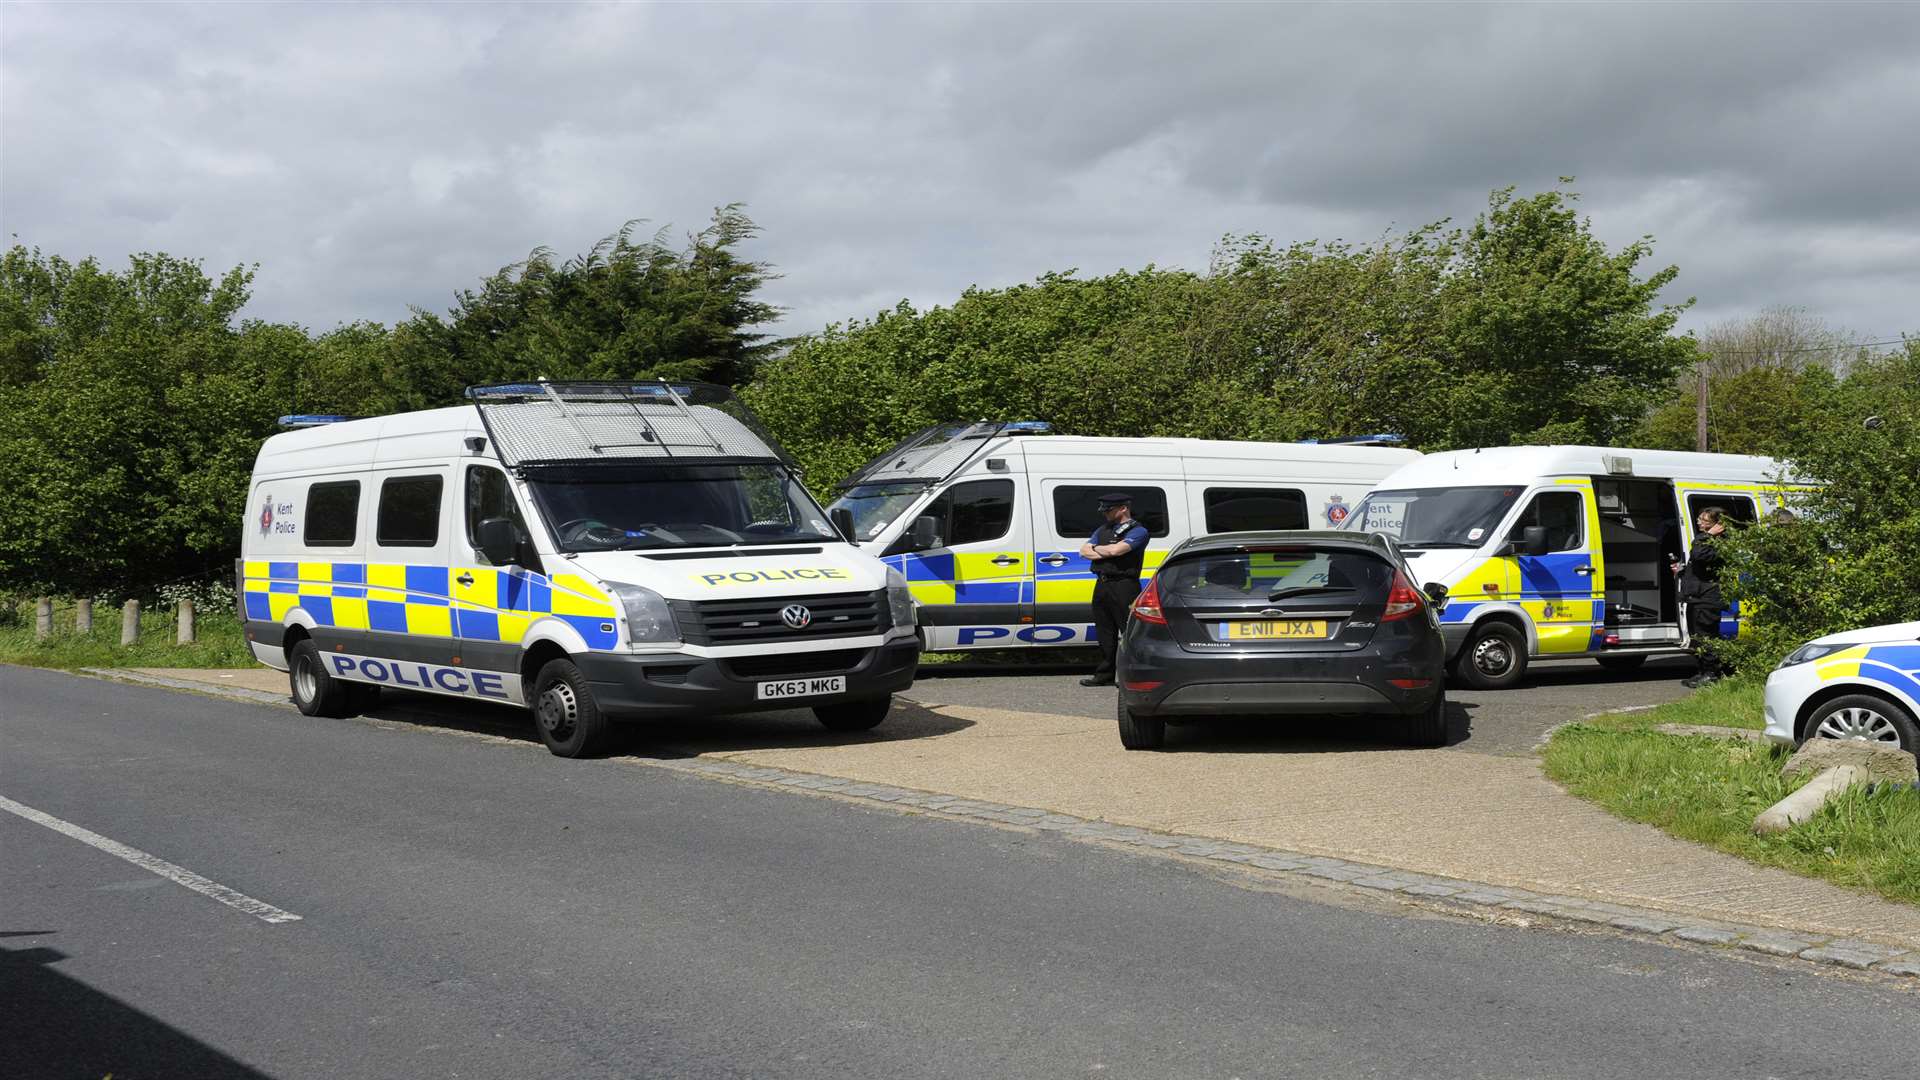 Police activity at the caravan site following the shooting